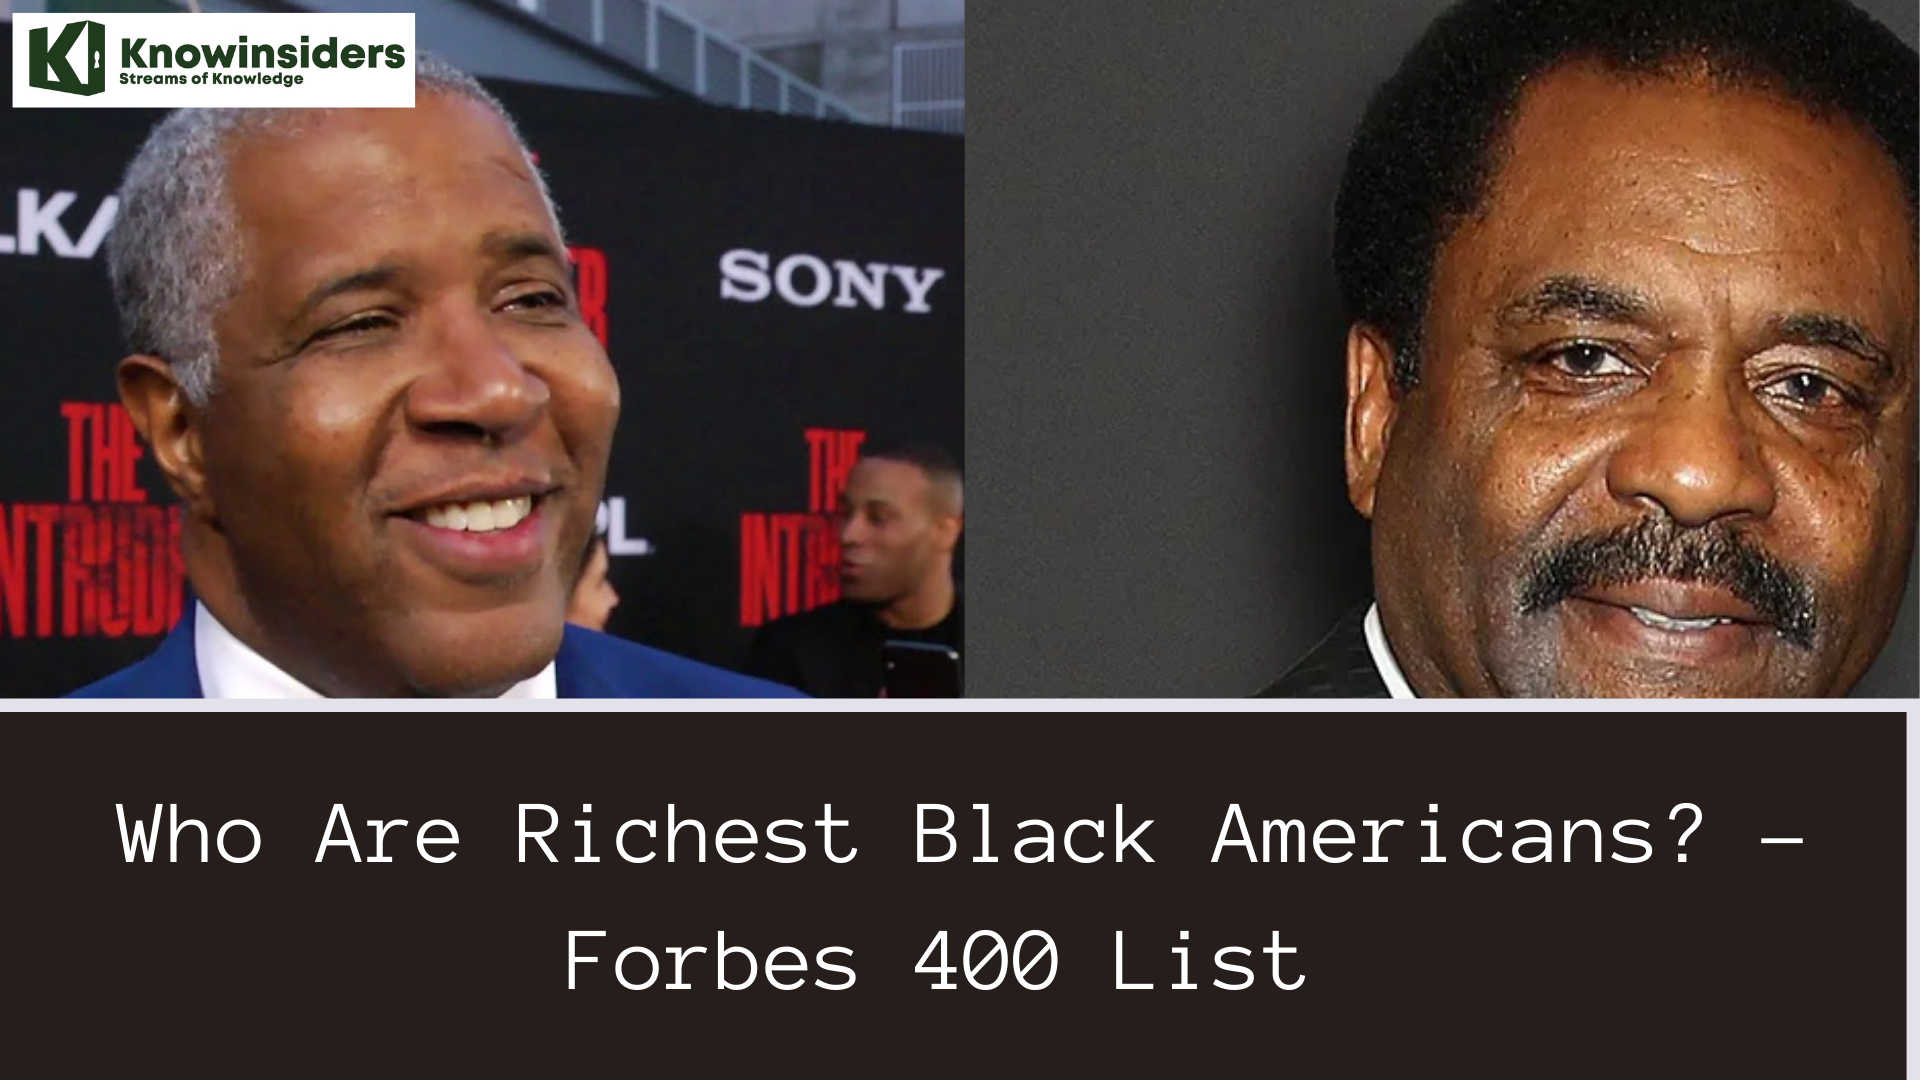 Who Are The Richest Black Americans?